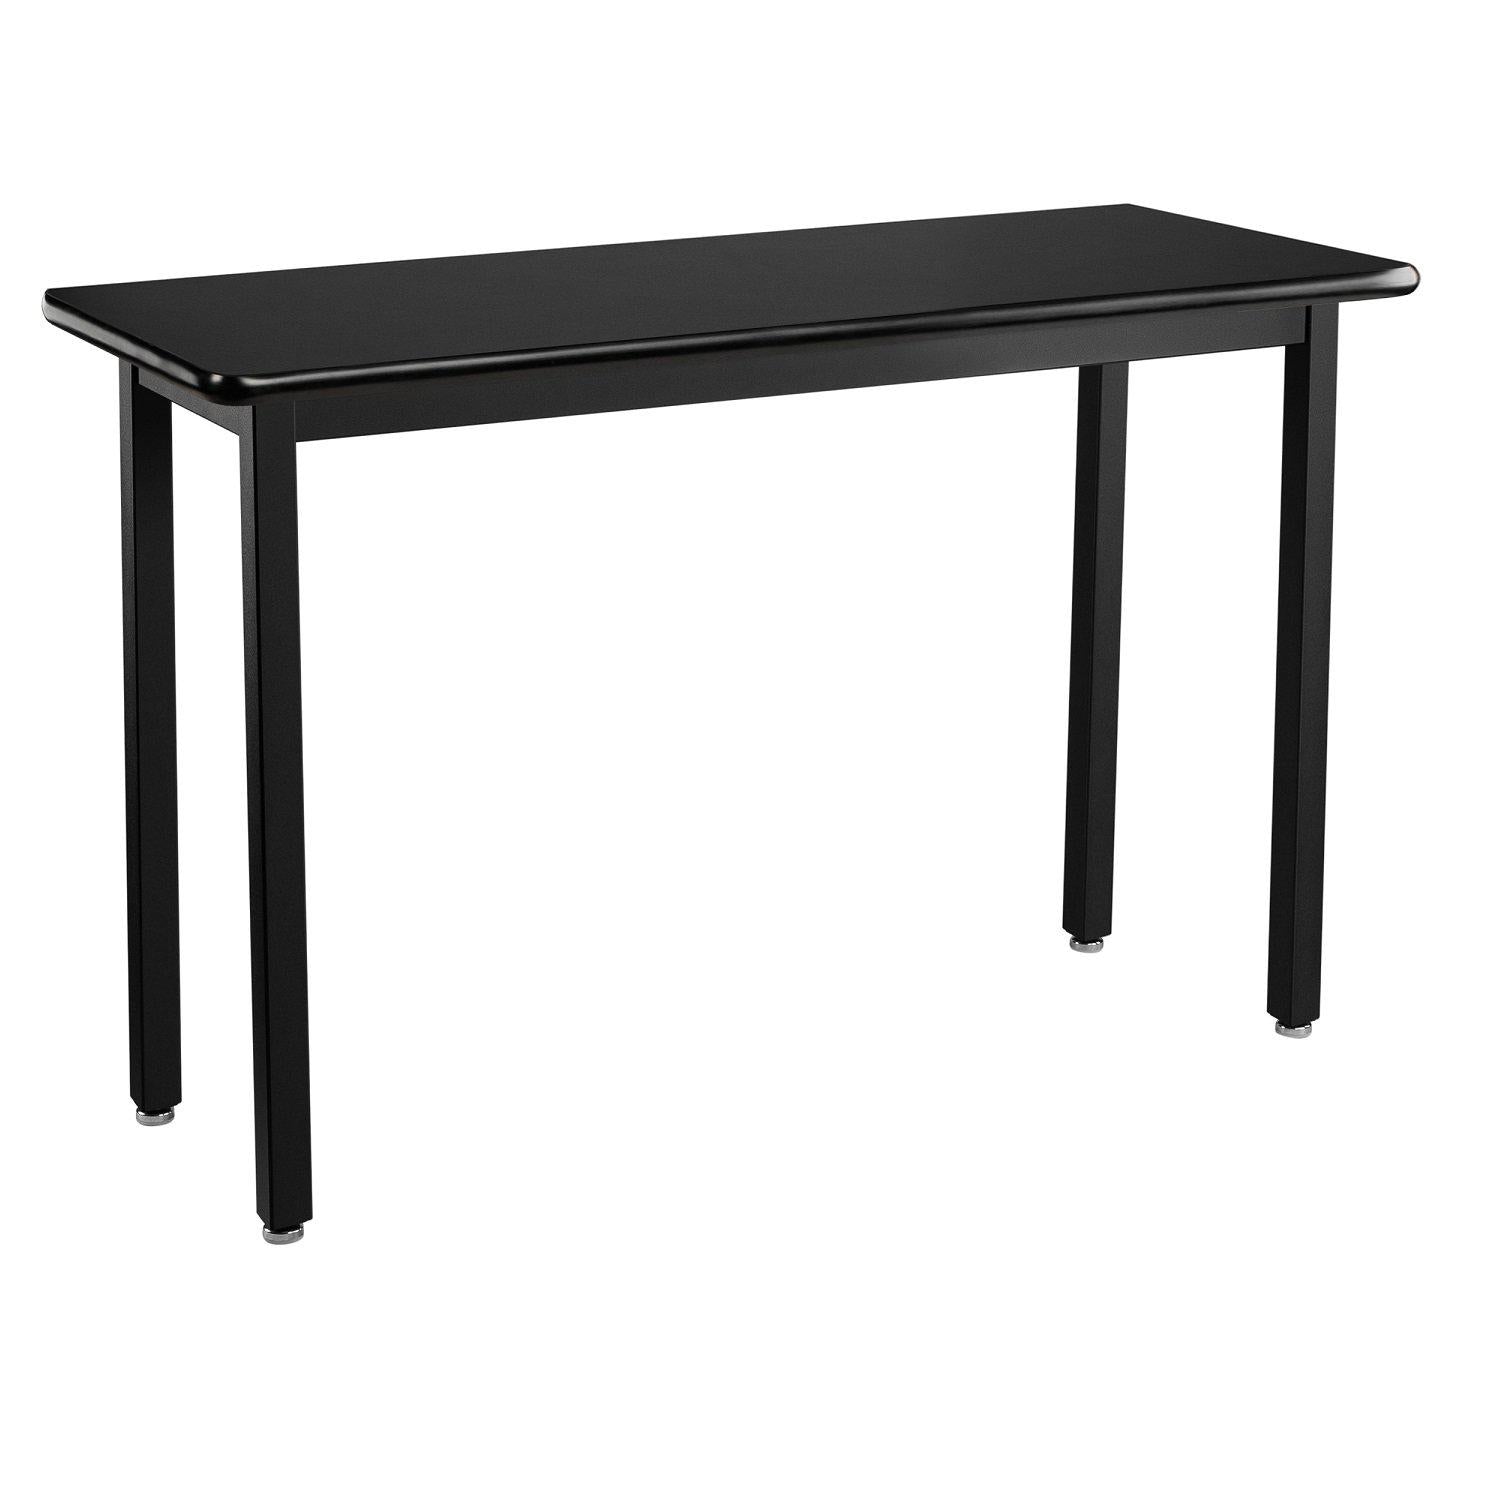 Heavy-Duty Fixed Height Utility Table, Black Frame, 18" x 60", High-Pressure Laminate Top with T-Mold Edge